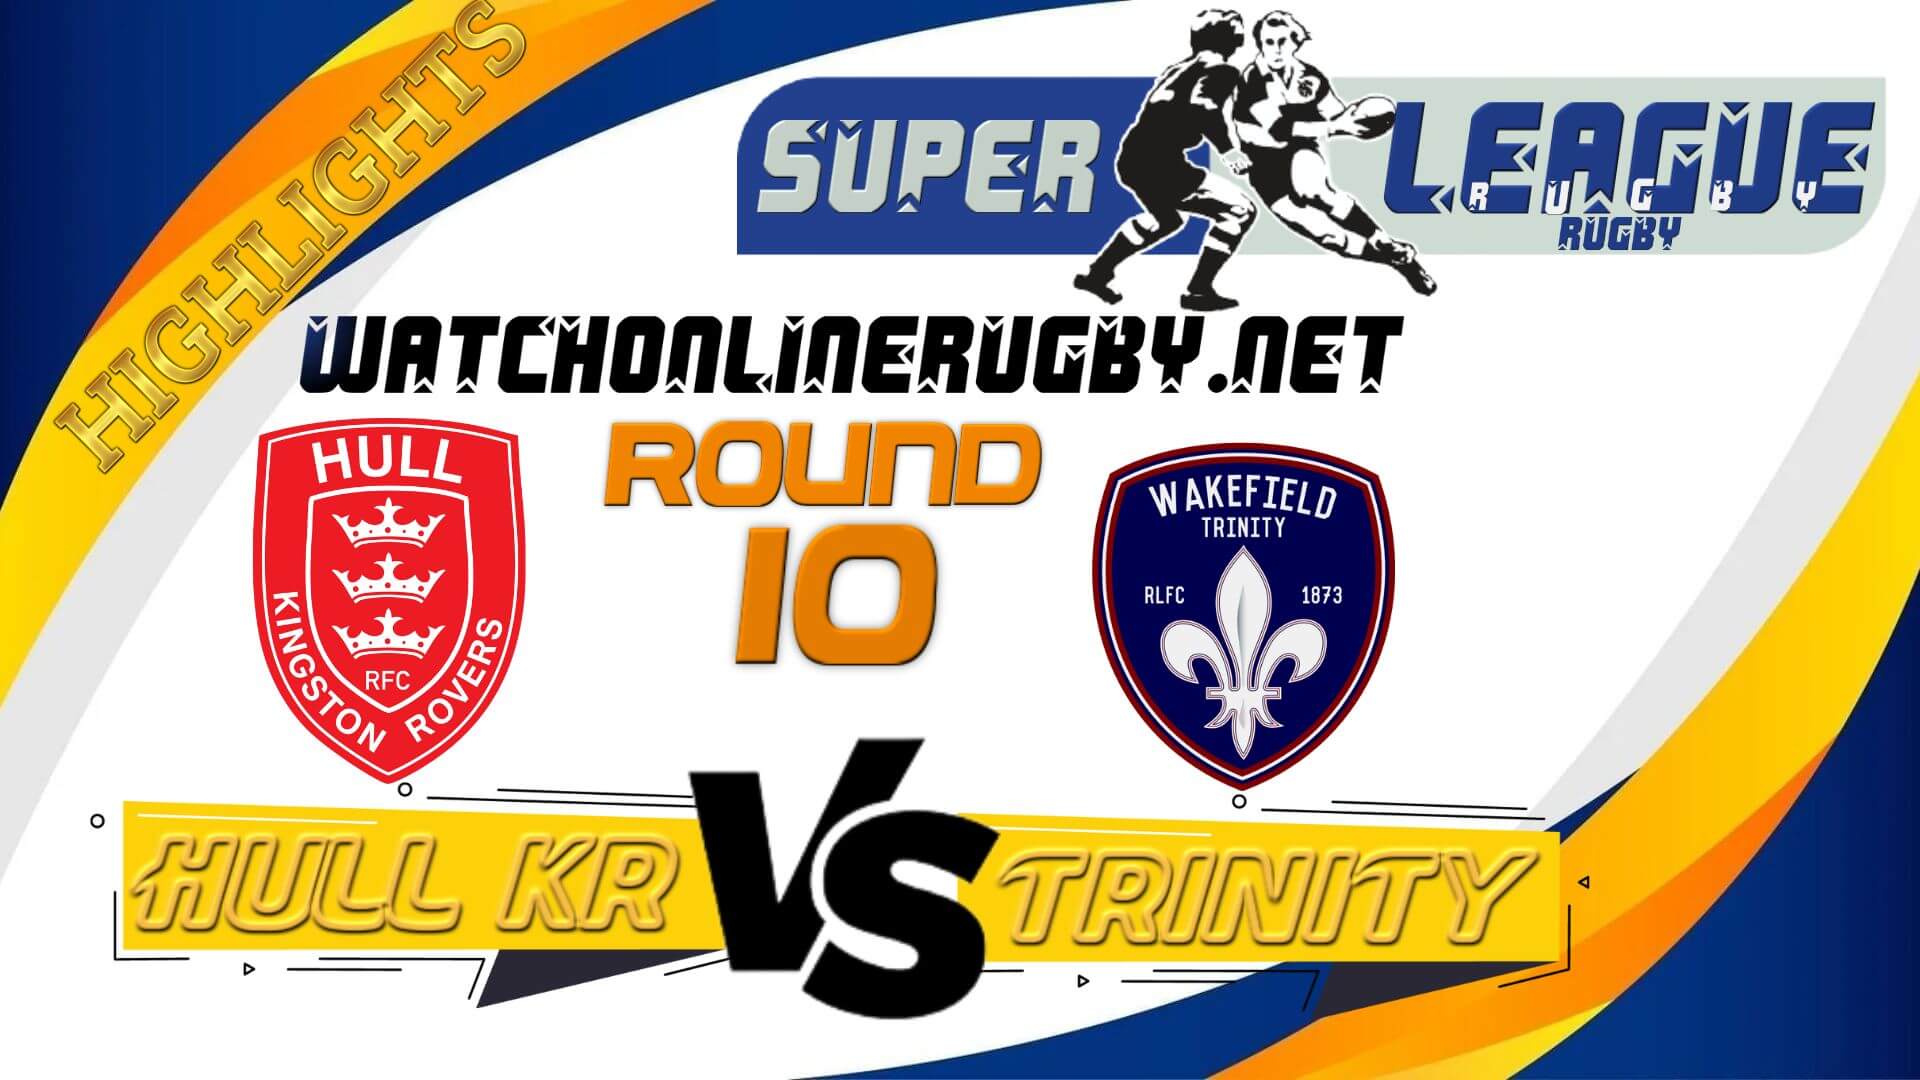 Hull KR Vs Wakefield Trinity Super League Rugby 2022 RD 10